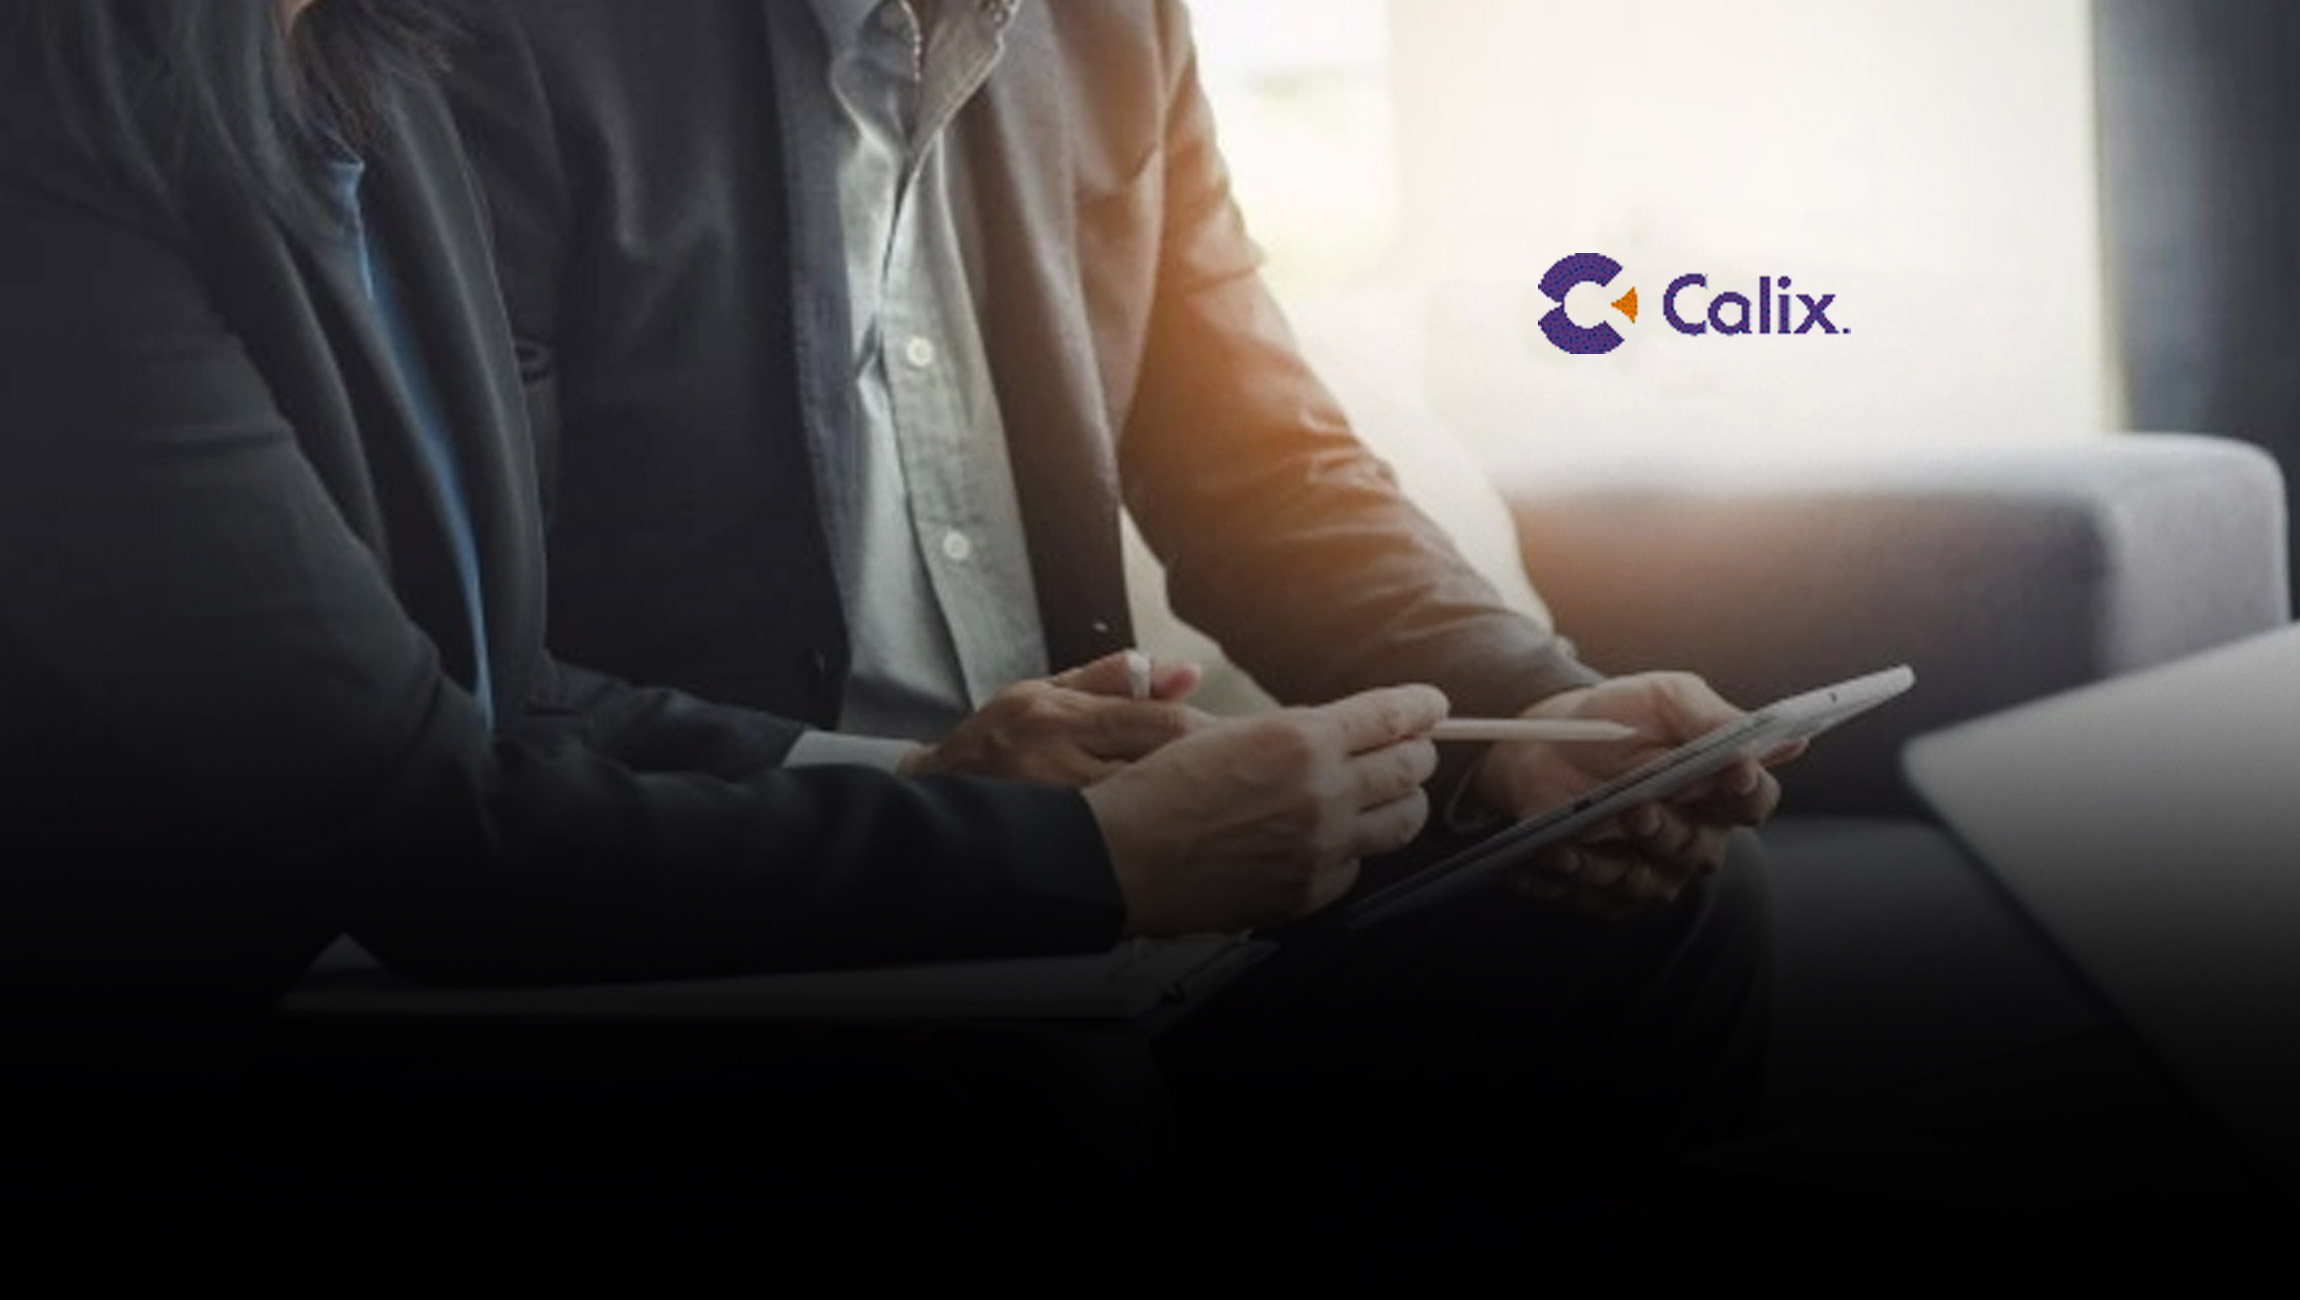 Calix Launches Mobile Support Cloud for Field Technicians to Align a Service Provider’s Extended Care Team, Deliver the Ultimate Experience, and Reduce Truck Rolls by up to 60%